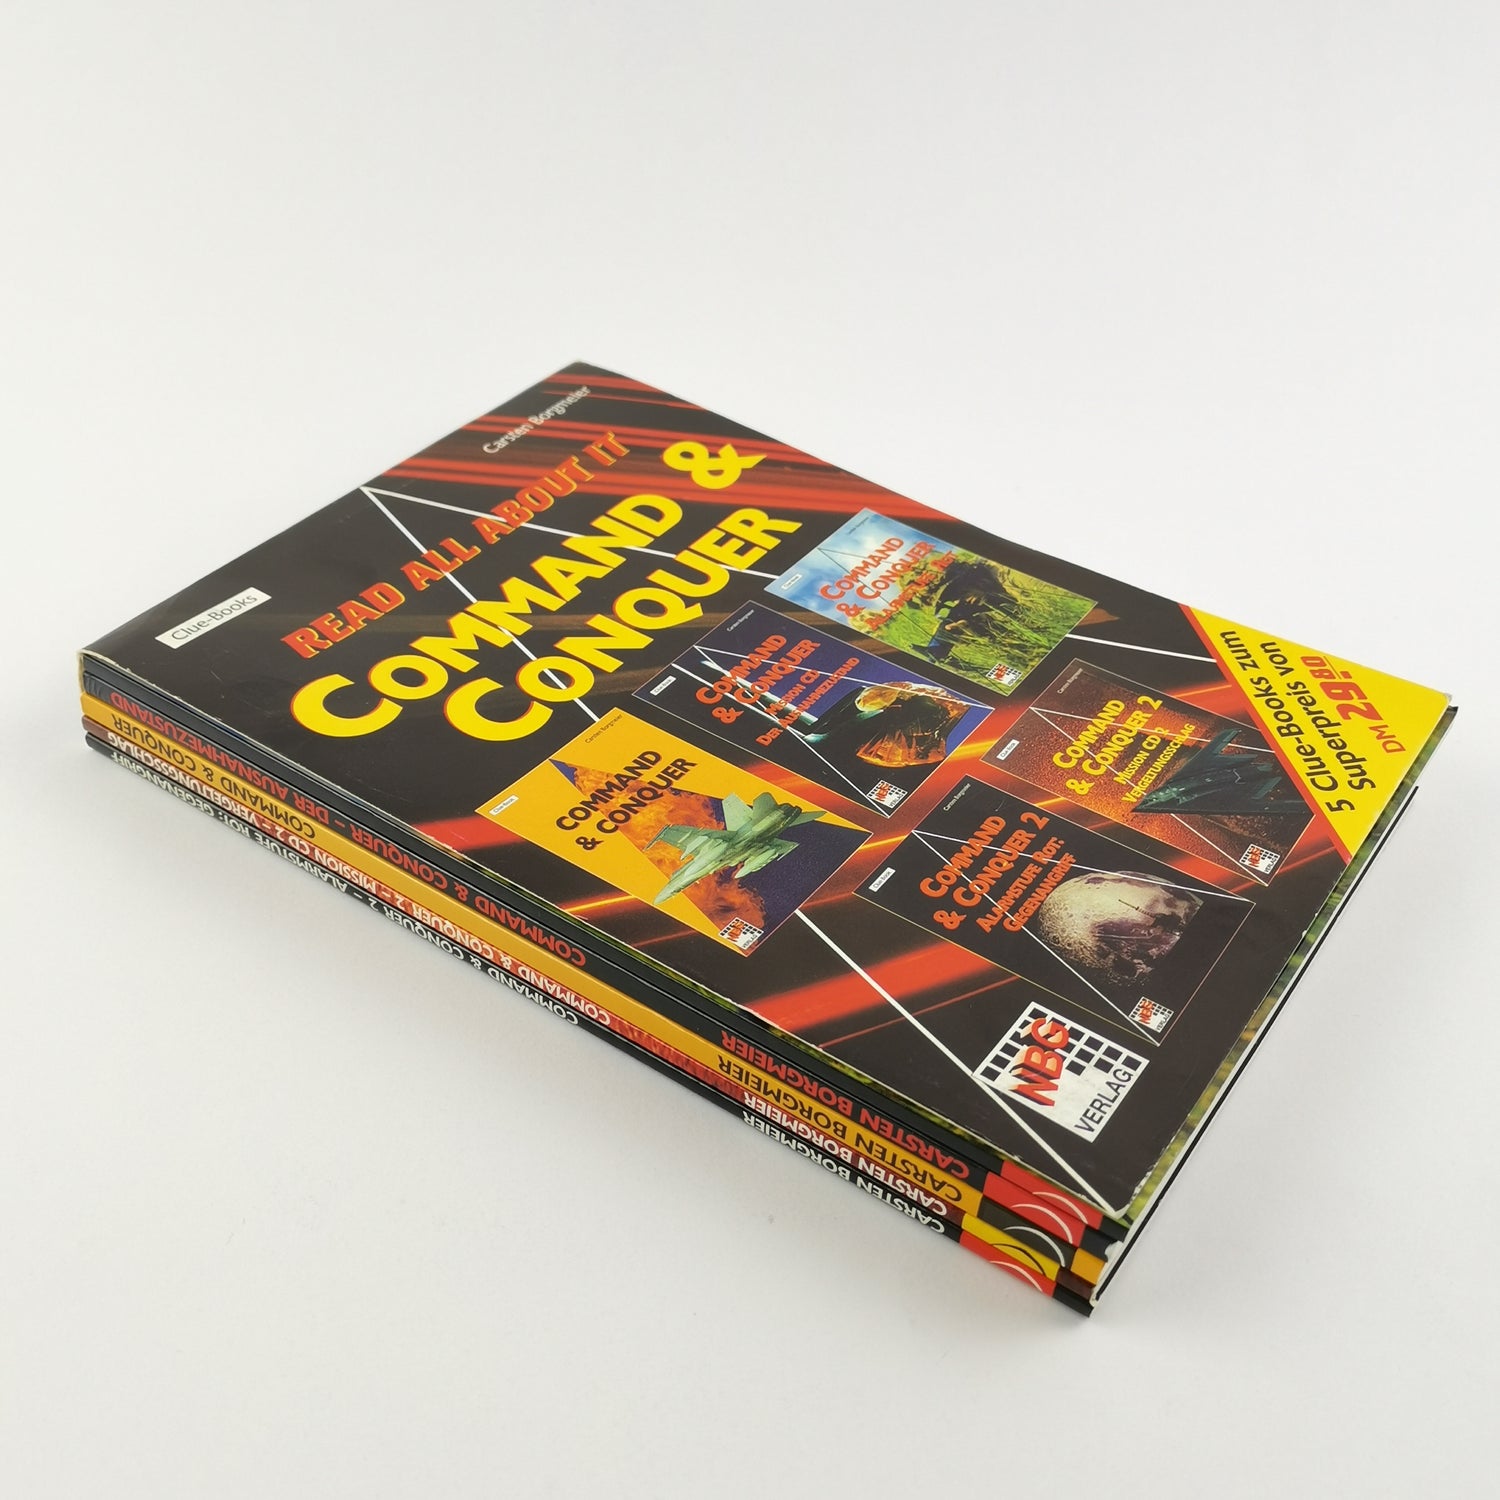 PC Guide / Gaming Advisor : Read all about it Command & Concuer | 5 clue books